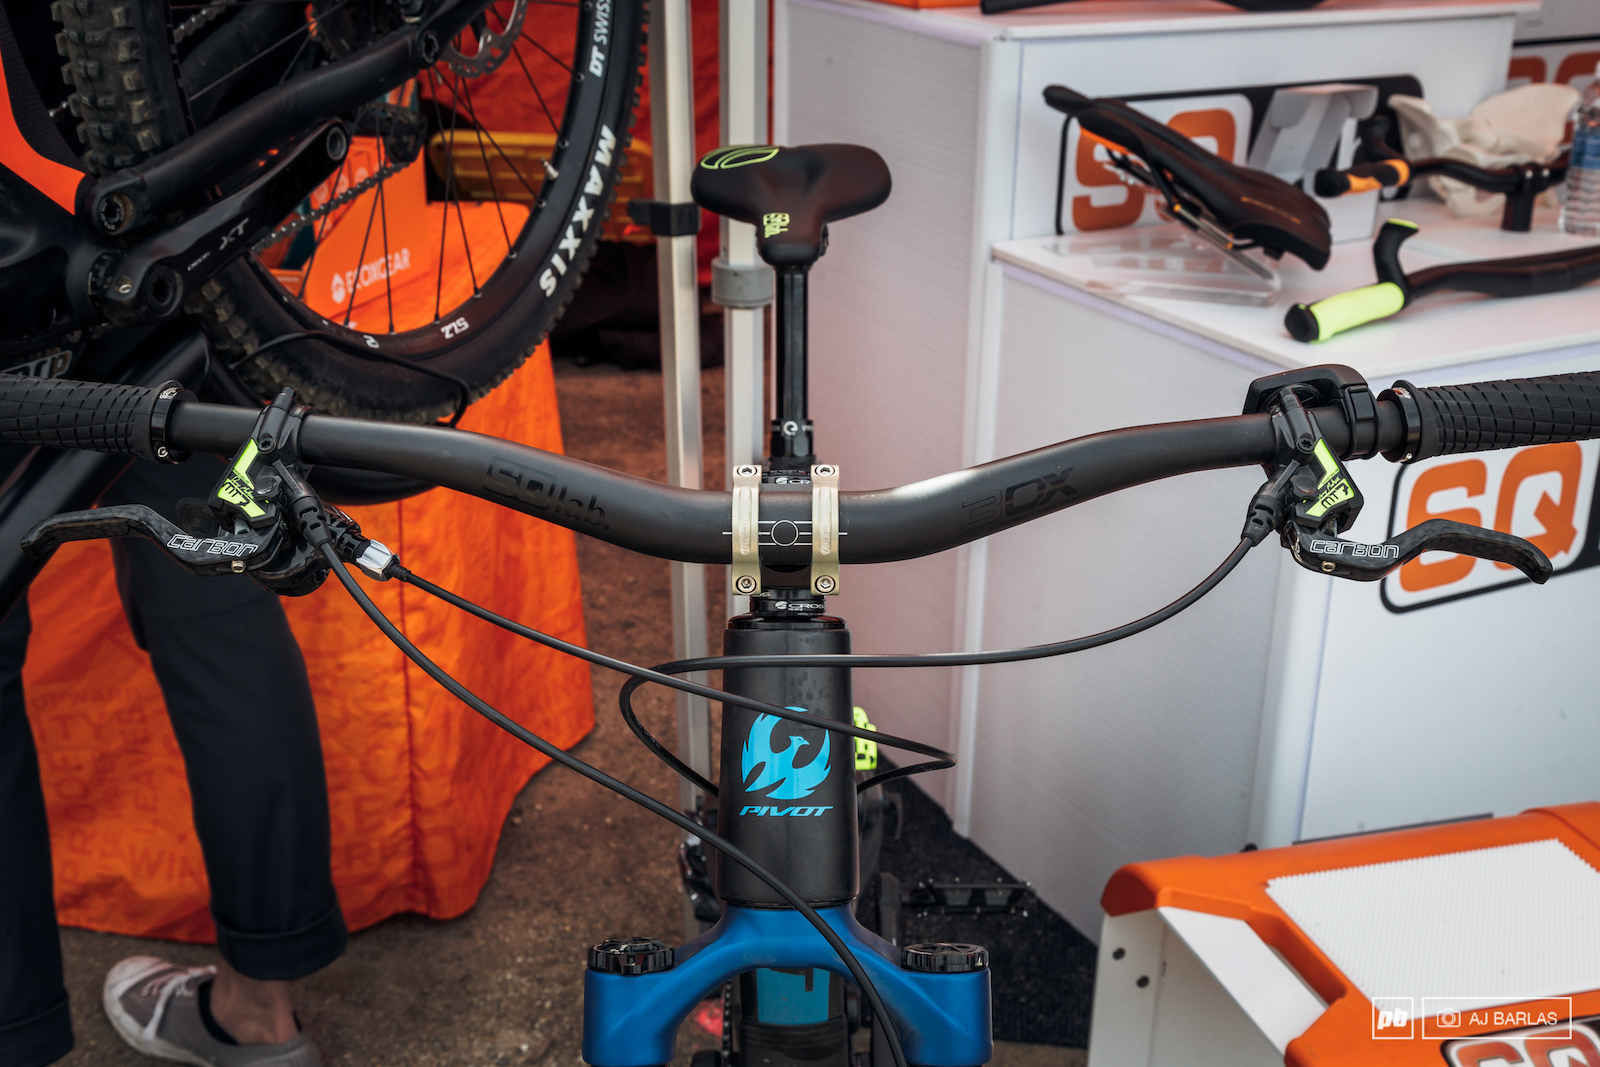 The bars feature a 4 degree upsweep and come in a range of rise options.